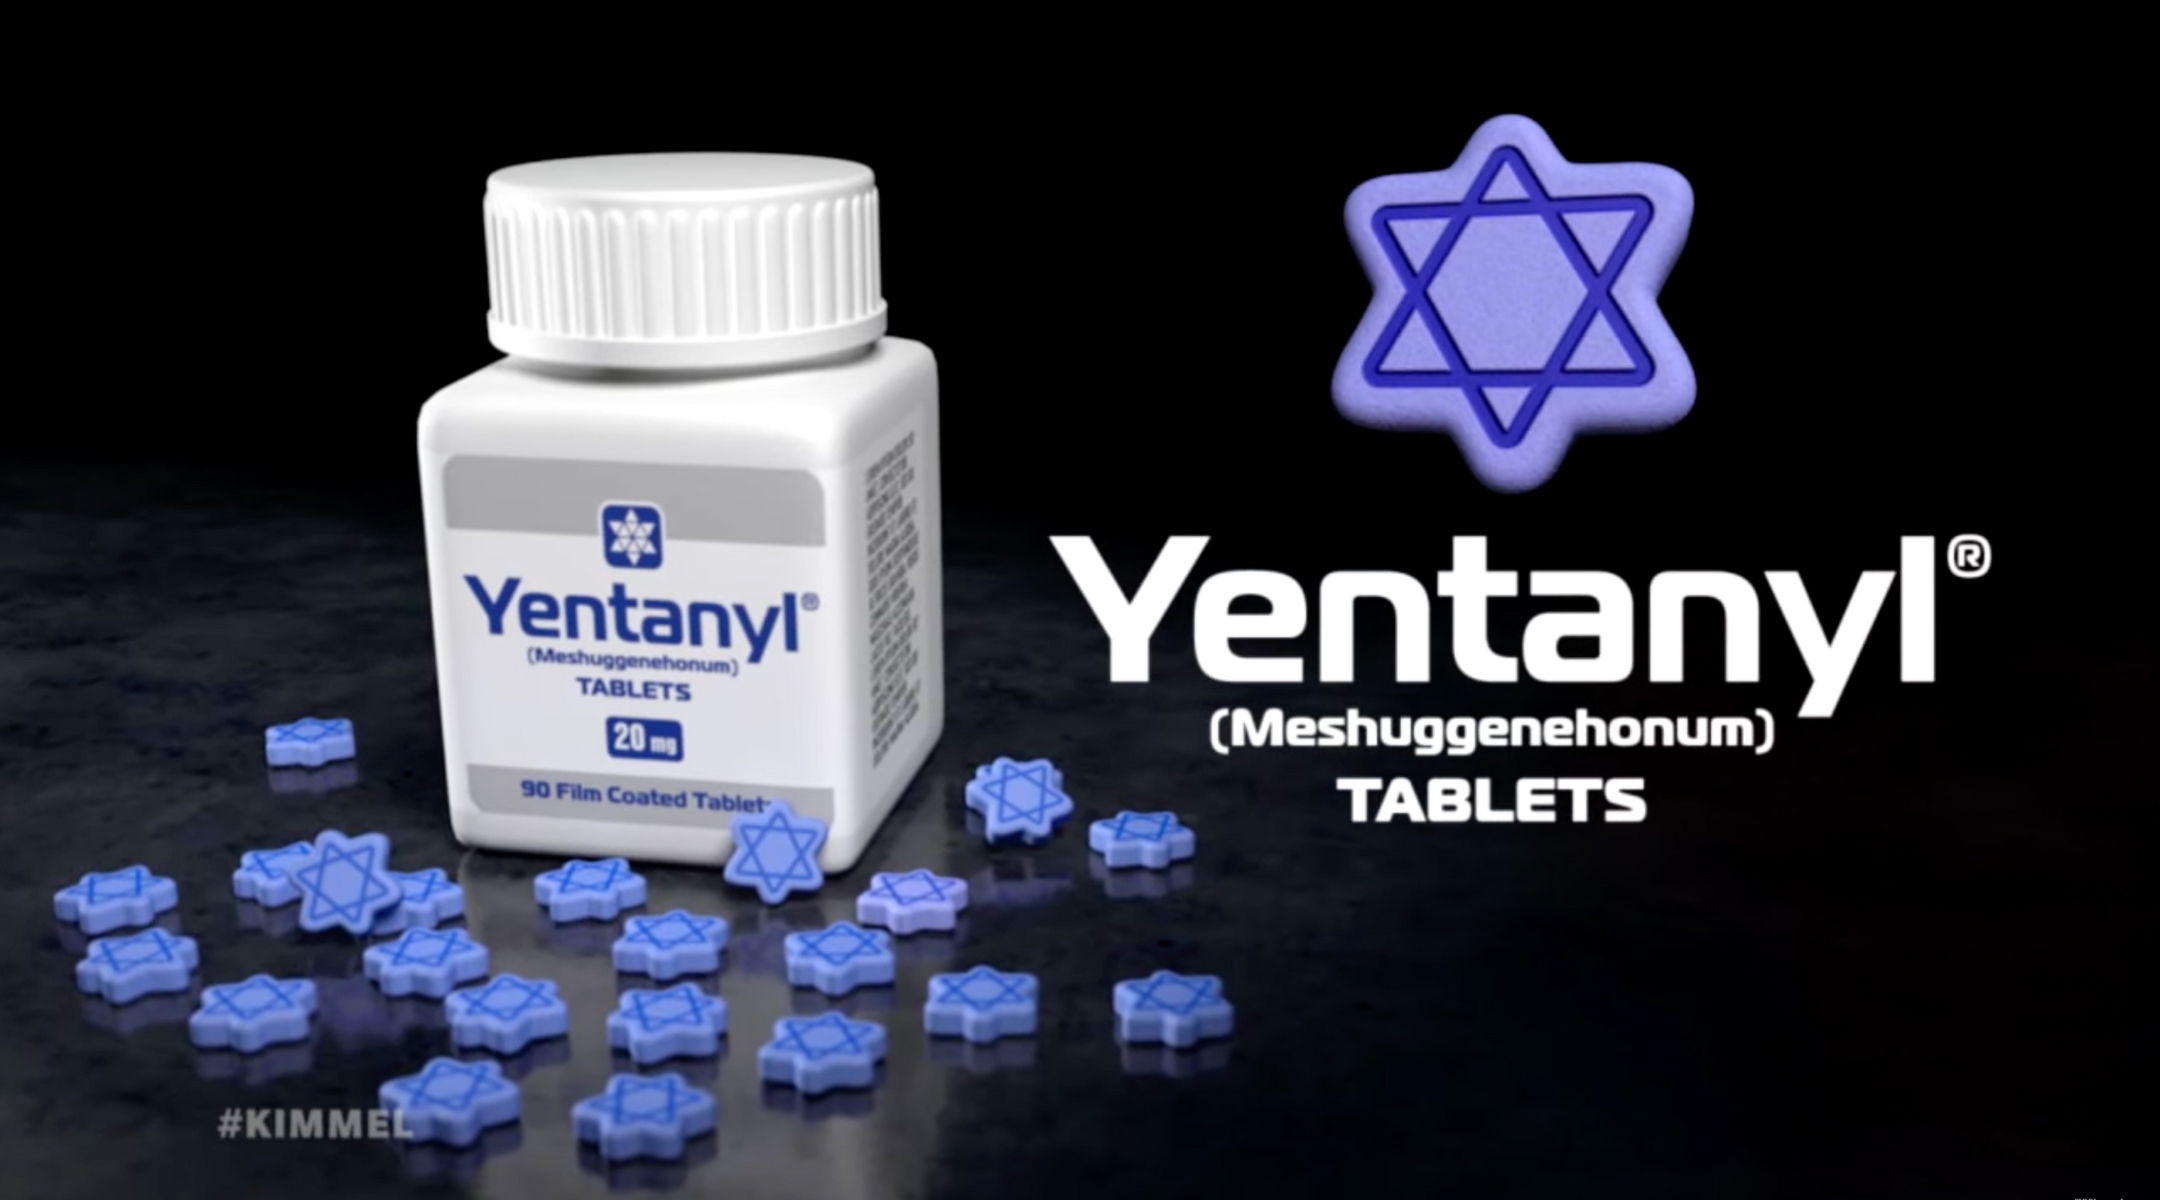 A Jimmy Kimmel sketch advertises a medication for antisemites known as “Yentanyl.” (Screenshot via YouTube)